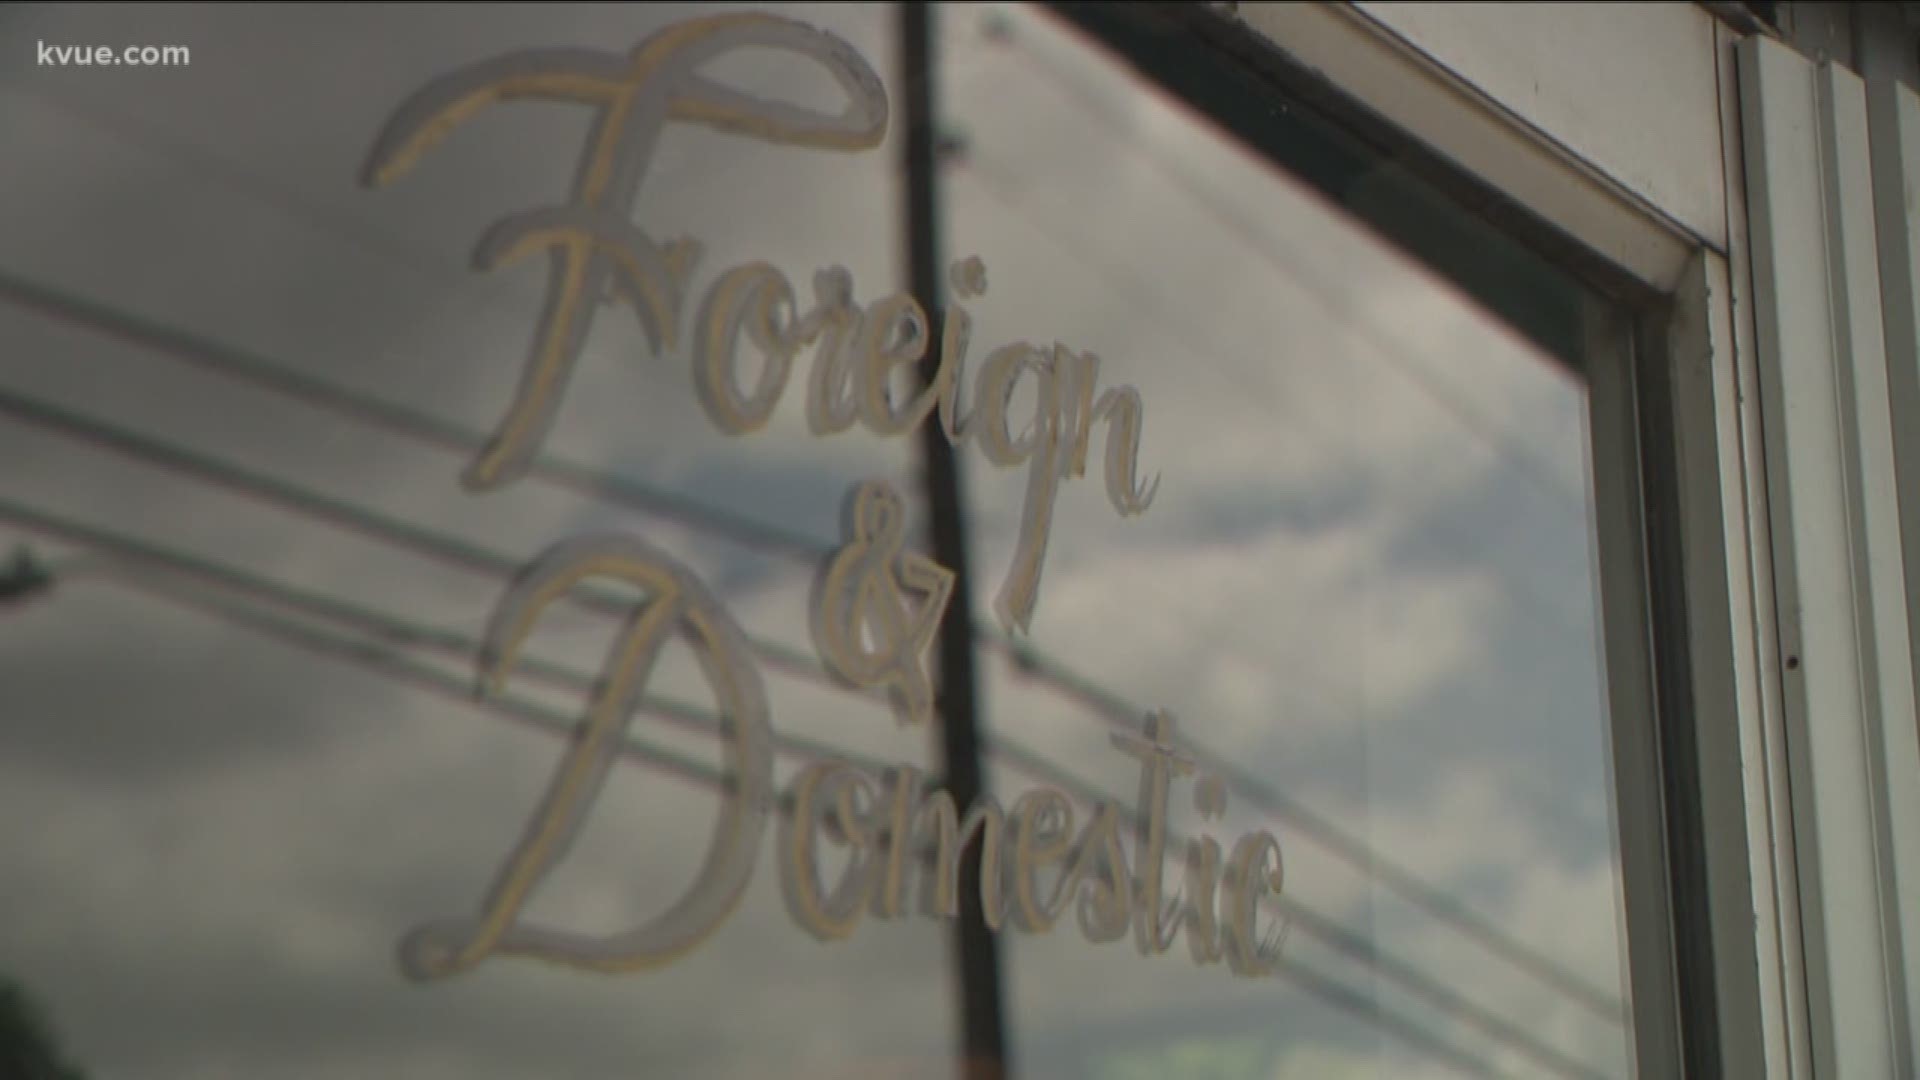 Foreign & Domestic's optional surcharge on customer bills has created a backlash online for the East Austin restaurant.